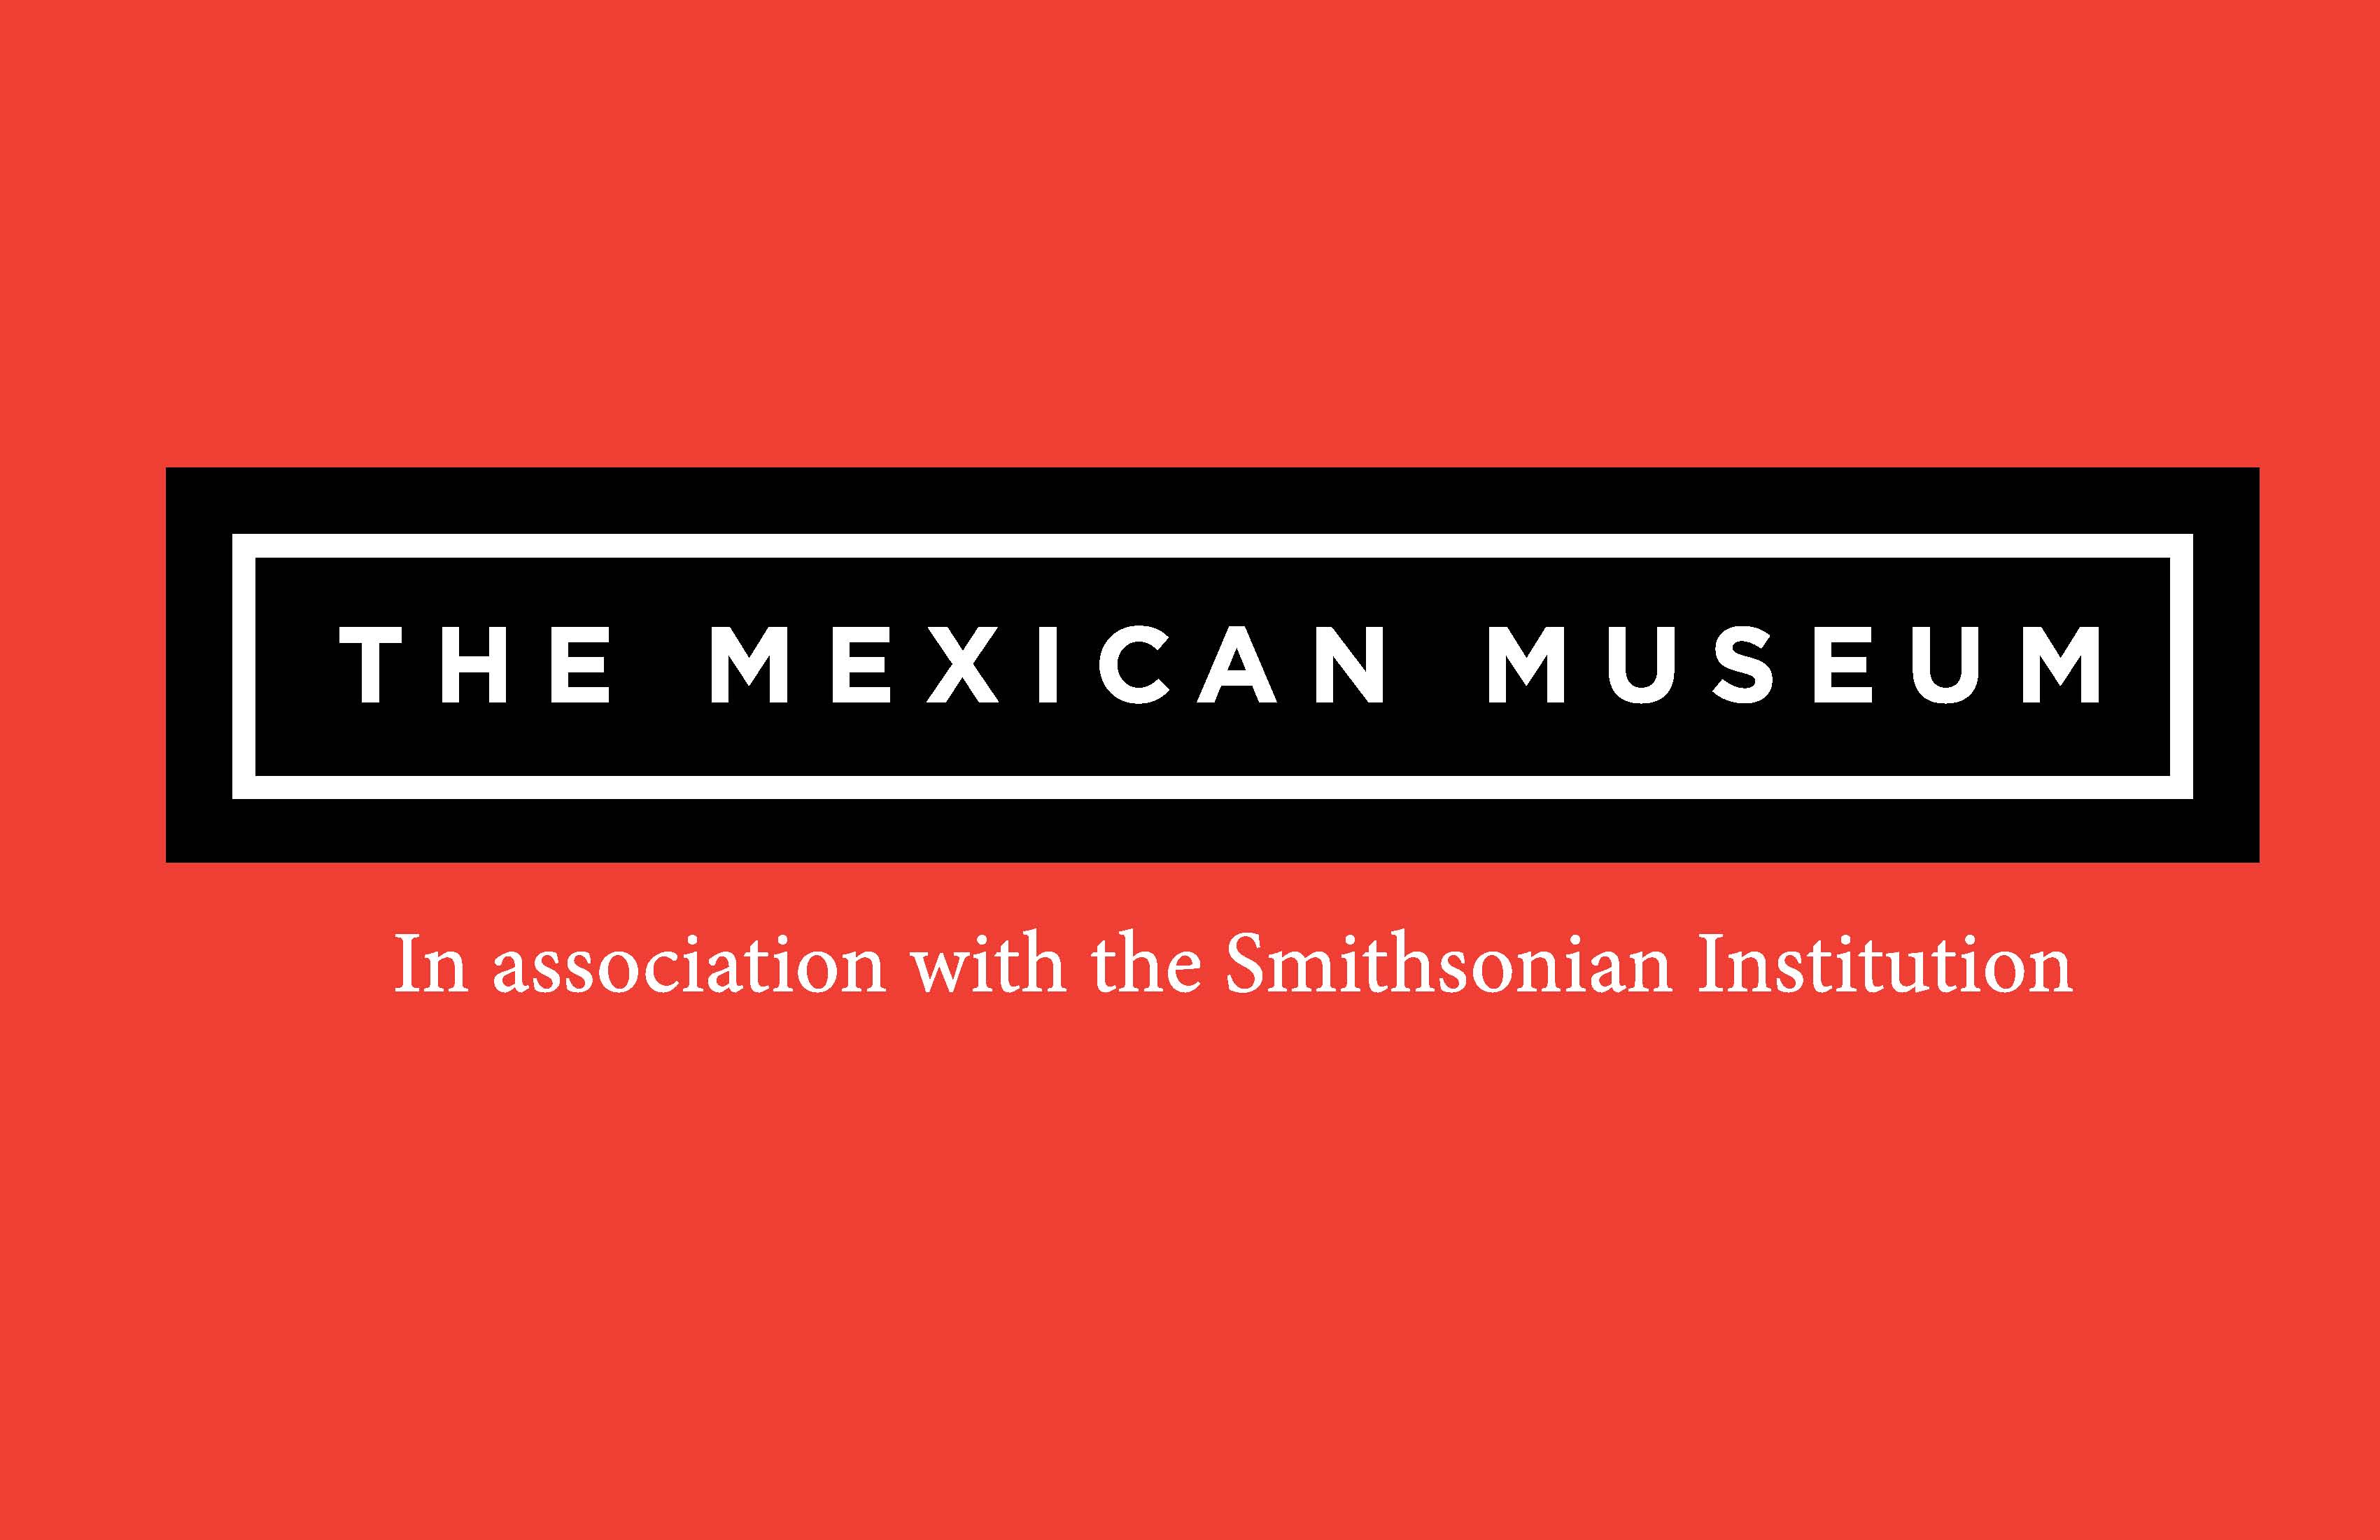 In 2012, The Mexican Museum became an affiliate of the Smithsonian Institution, the nation’s largest museum network. For more information, please visit: http://www.mexicanmuseum.org/.